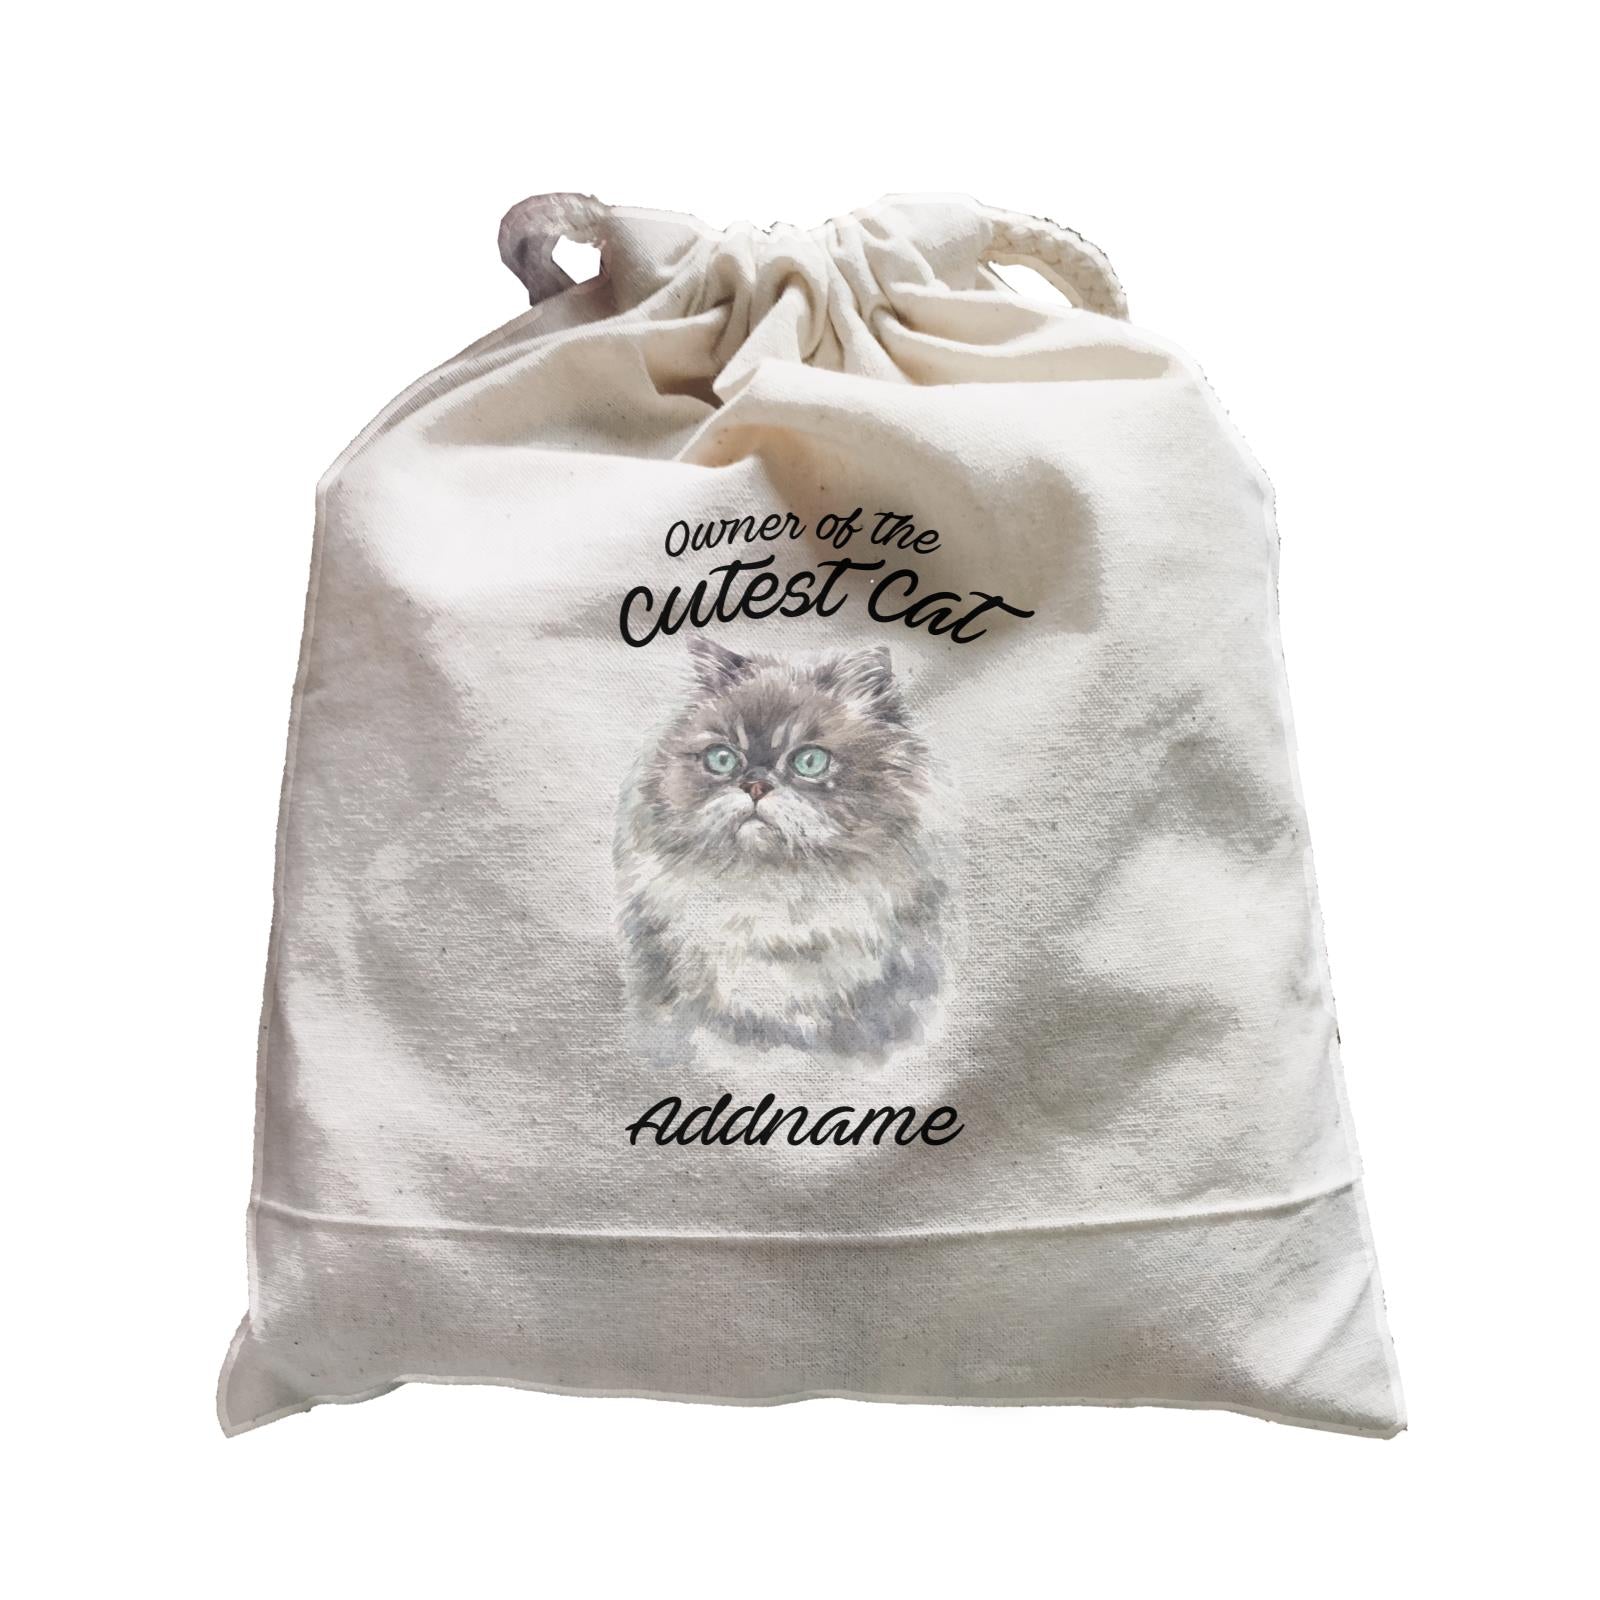 Watercolor Owner Of The Cutest Cat Himalayan Addname Satchel